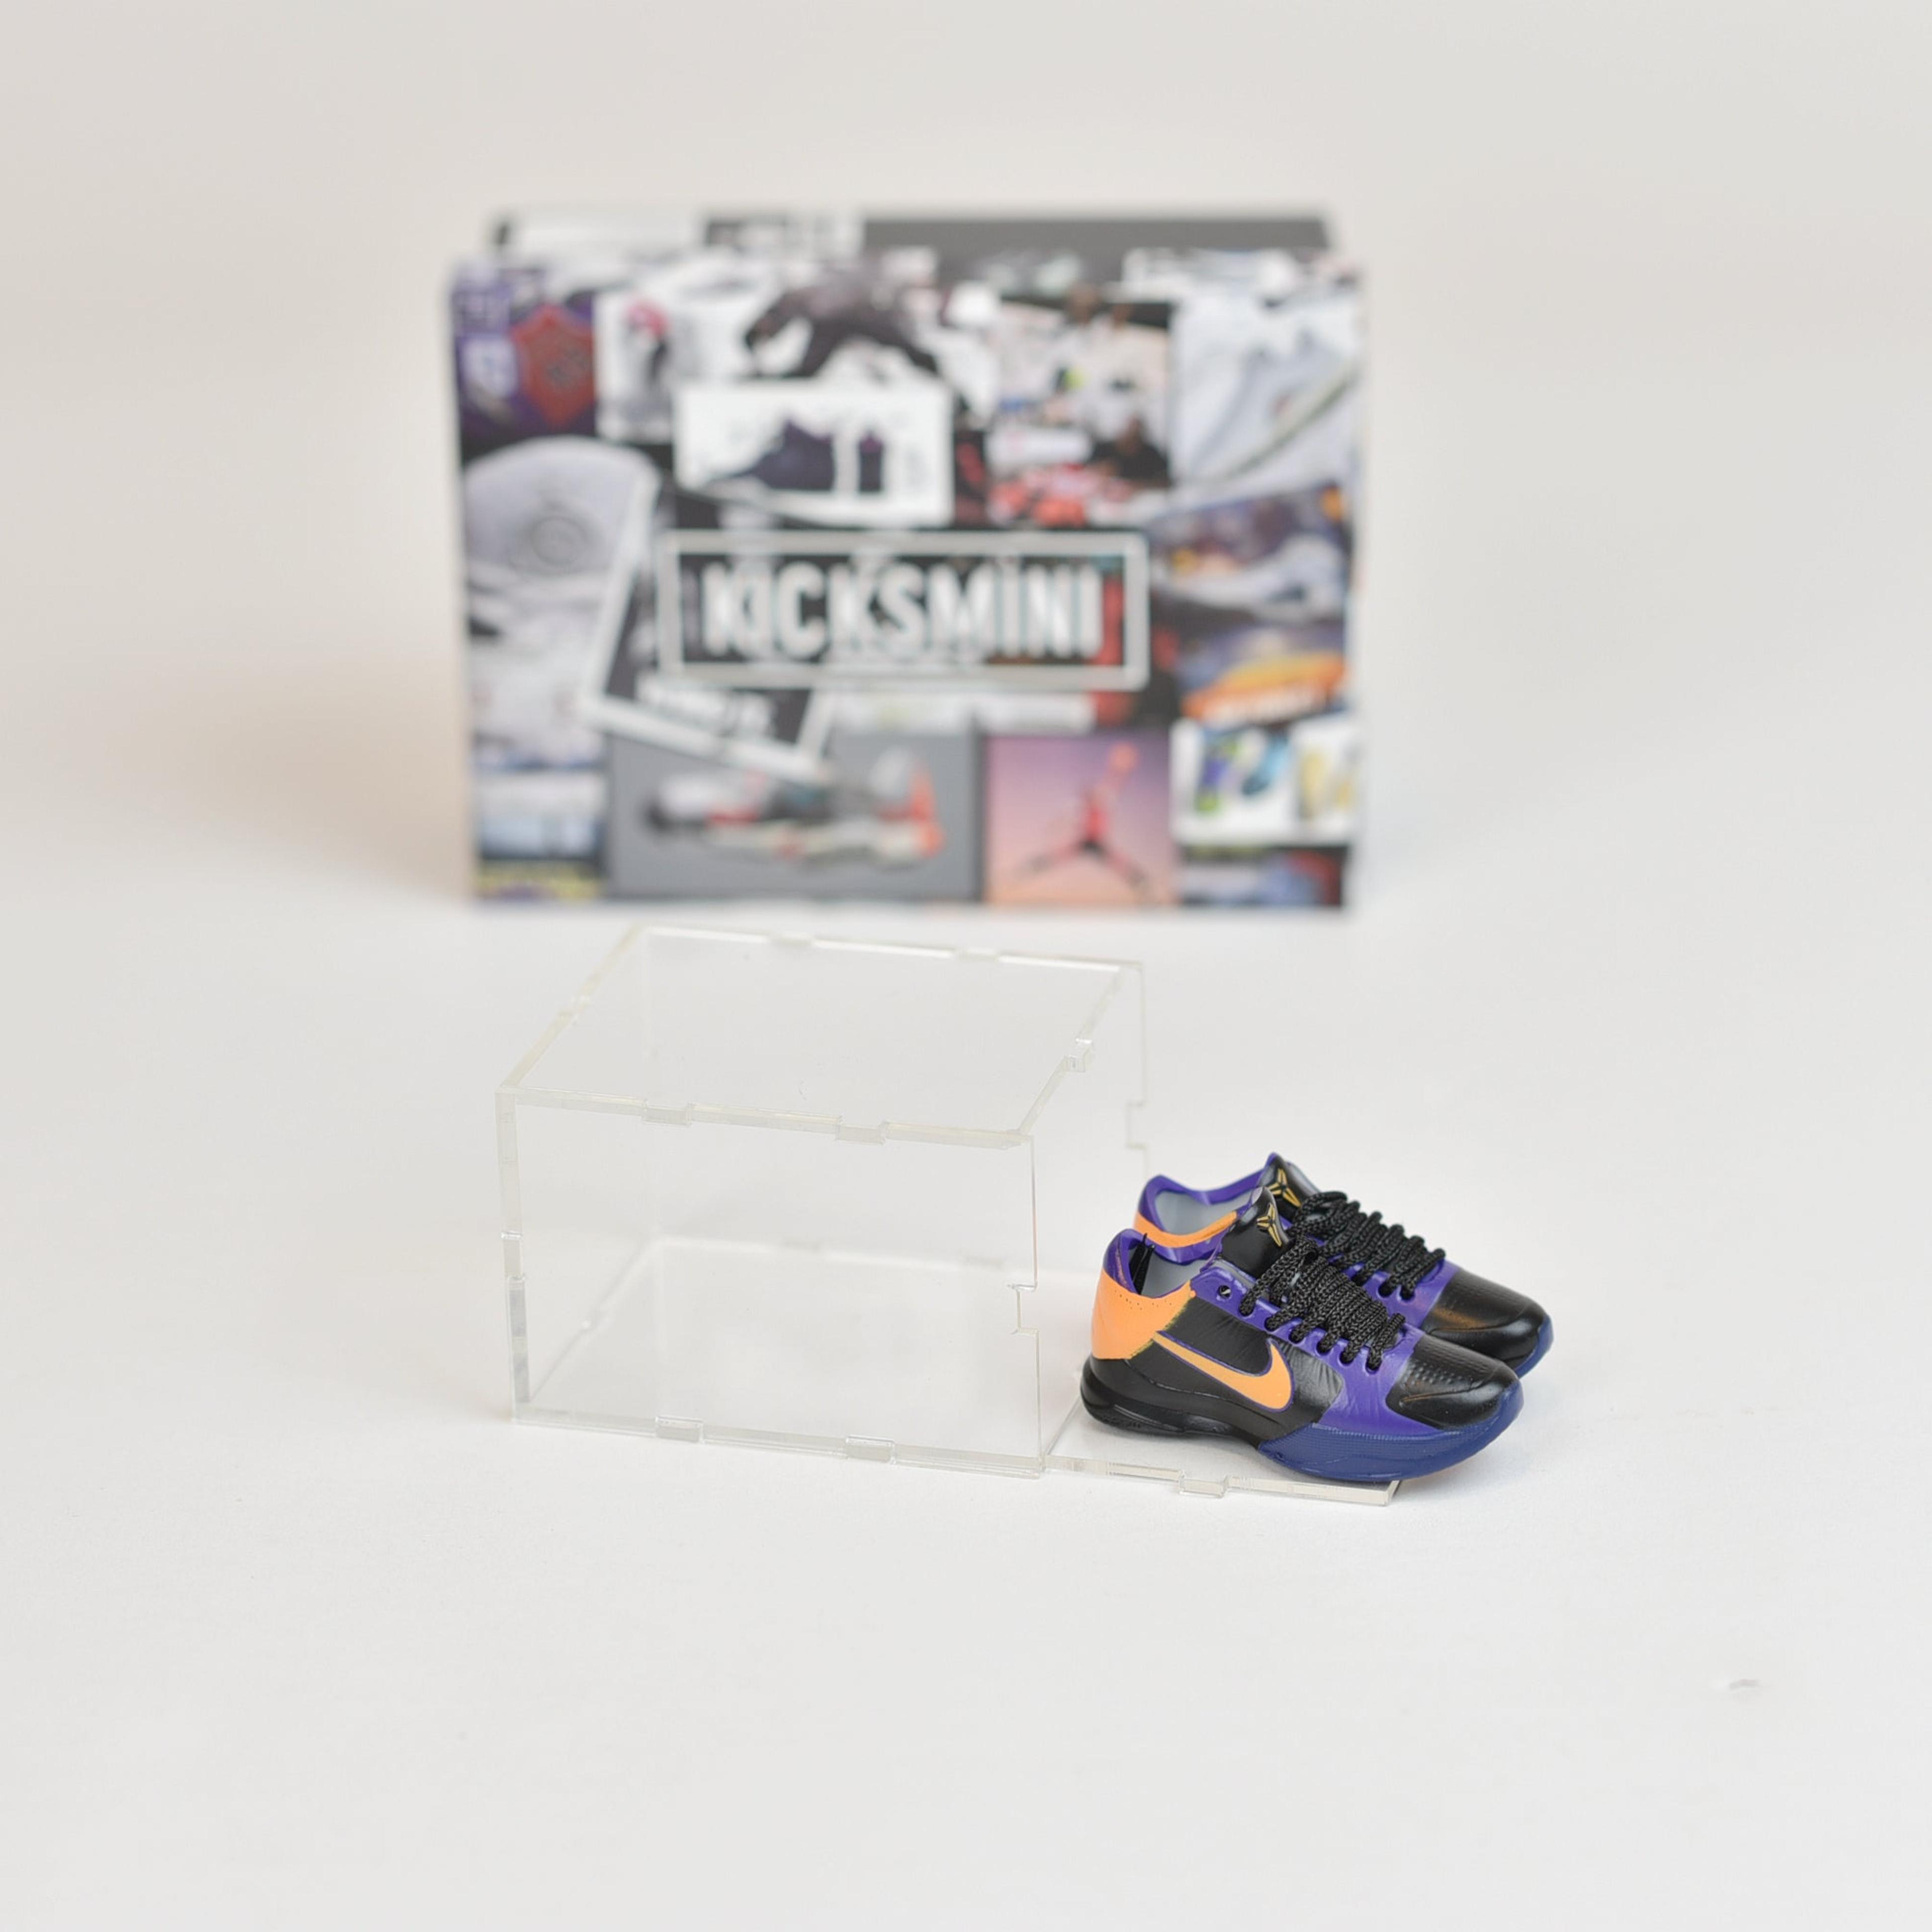 Alternate View 24 of Kobe Bryant/LeBron James/Steph Curry Mini Sneaker Collection wit